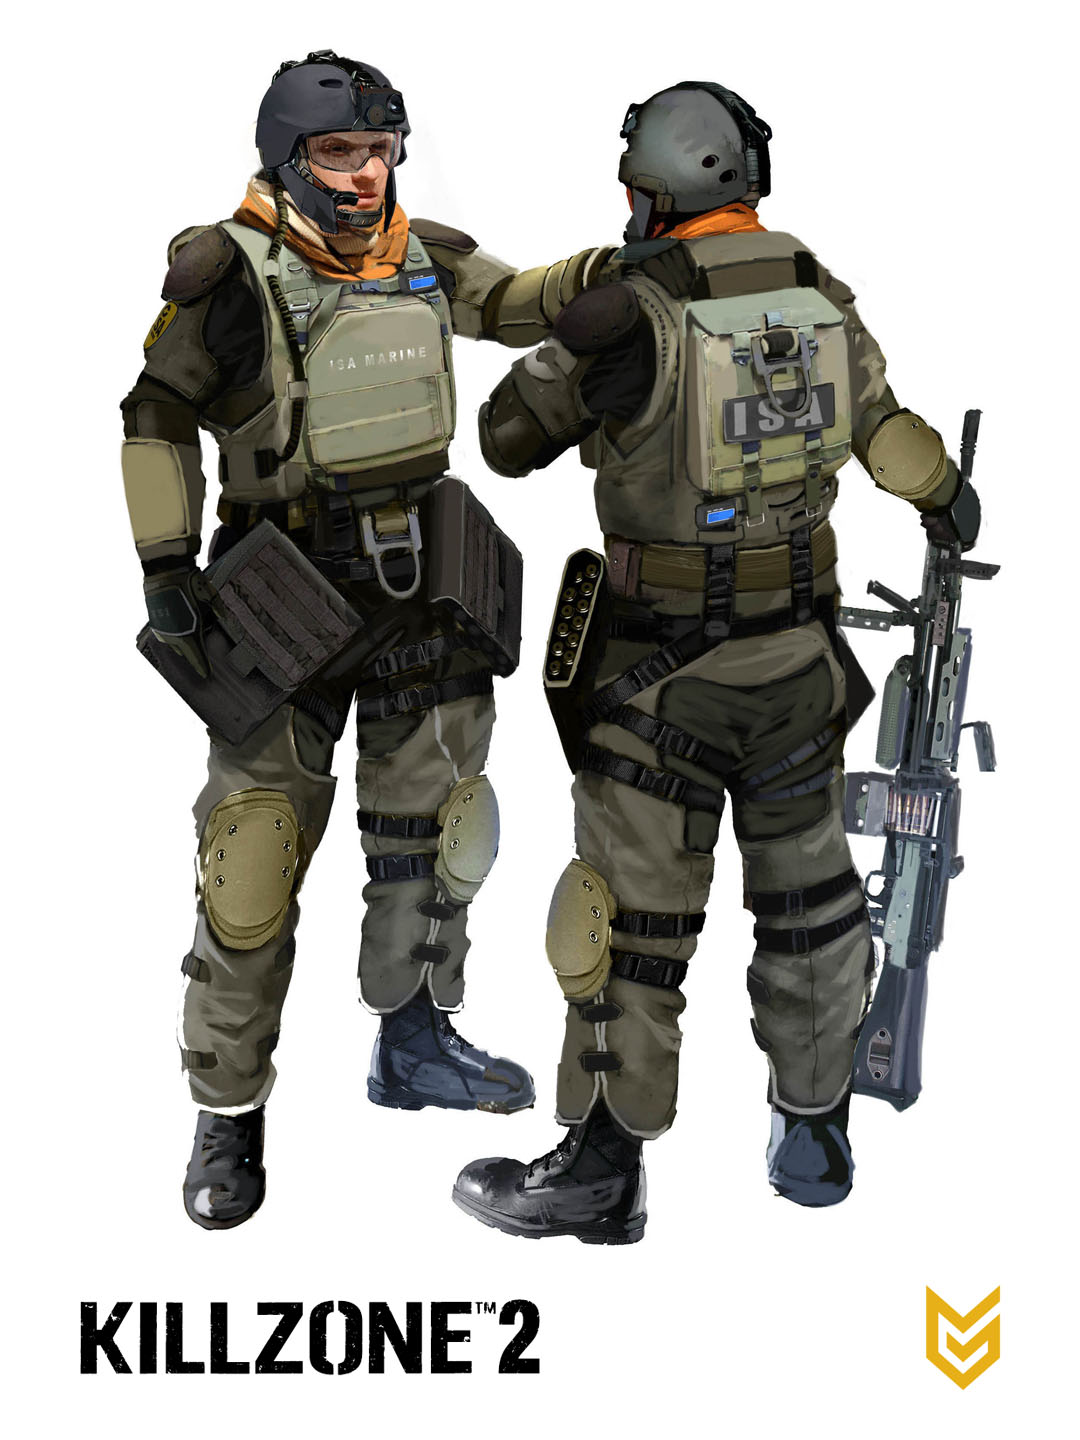 The Pro Tec helmets would be a sick addition. : r/EscapefromTarkov